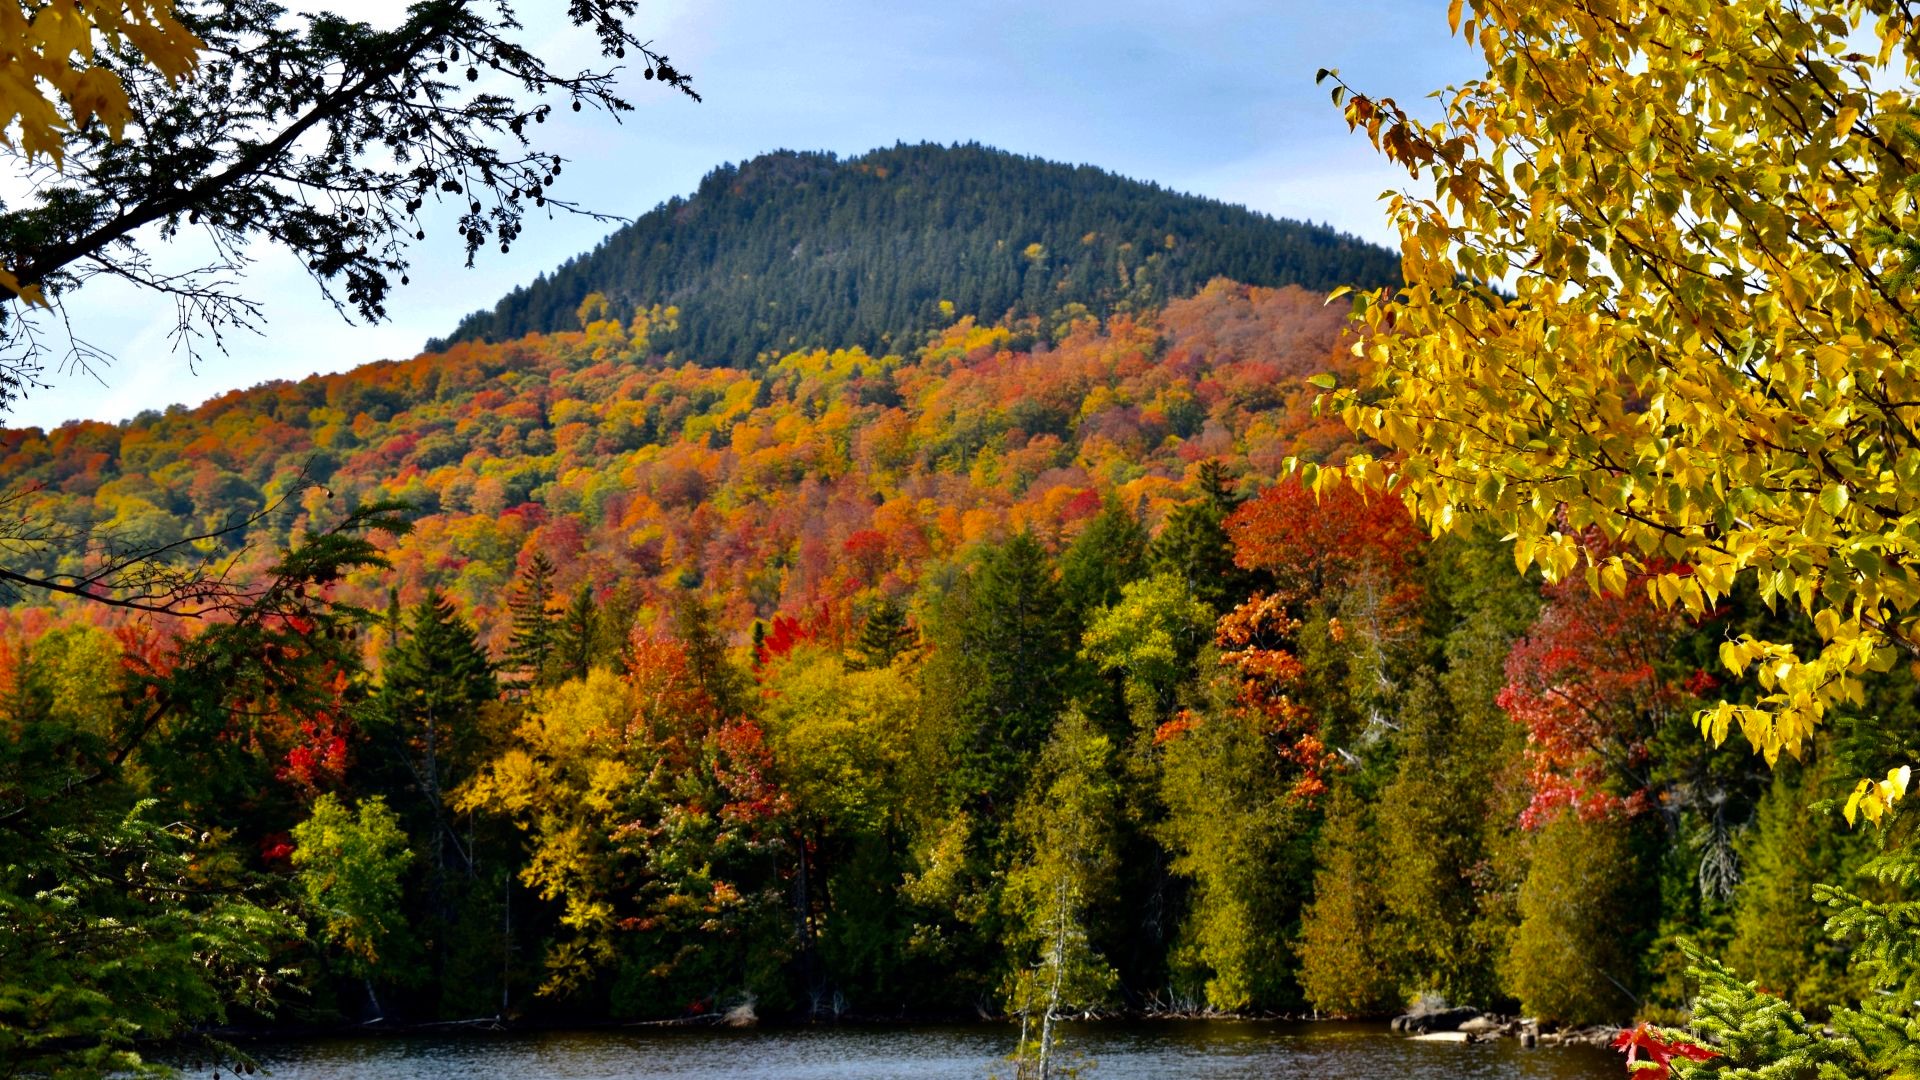 Maine fall foliage season comes to an end early due to drought